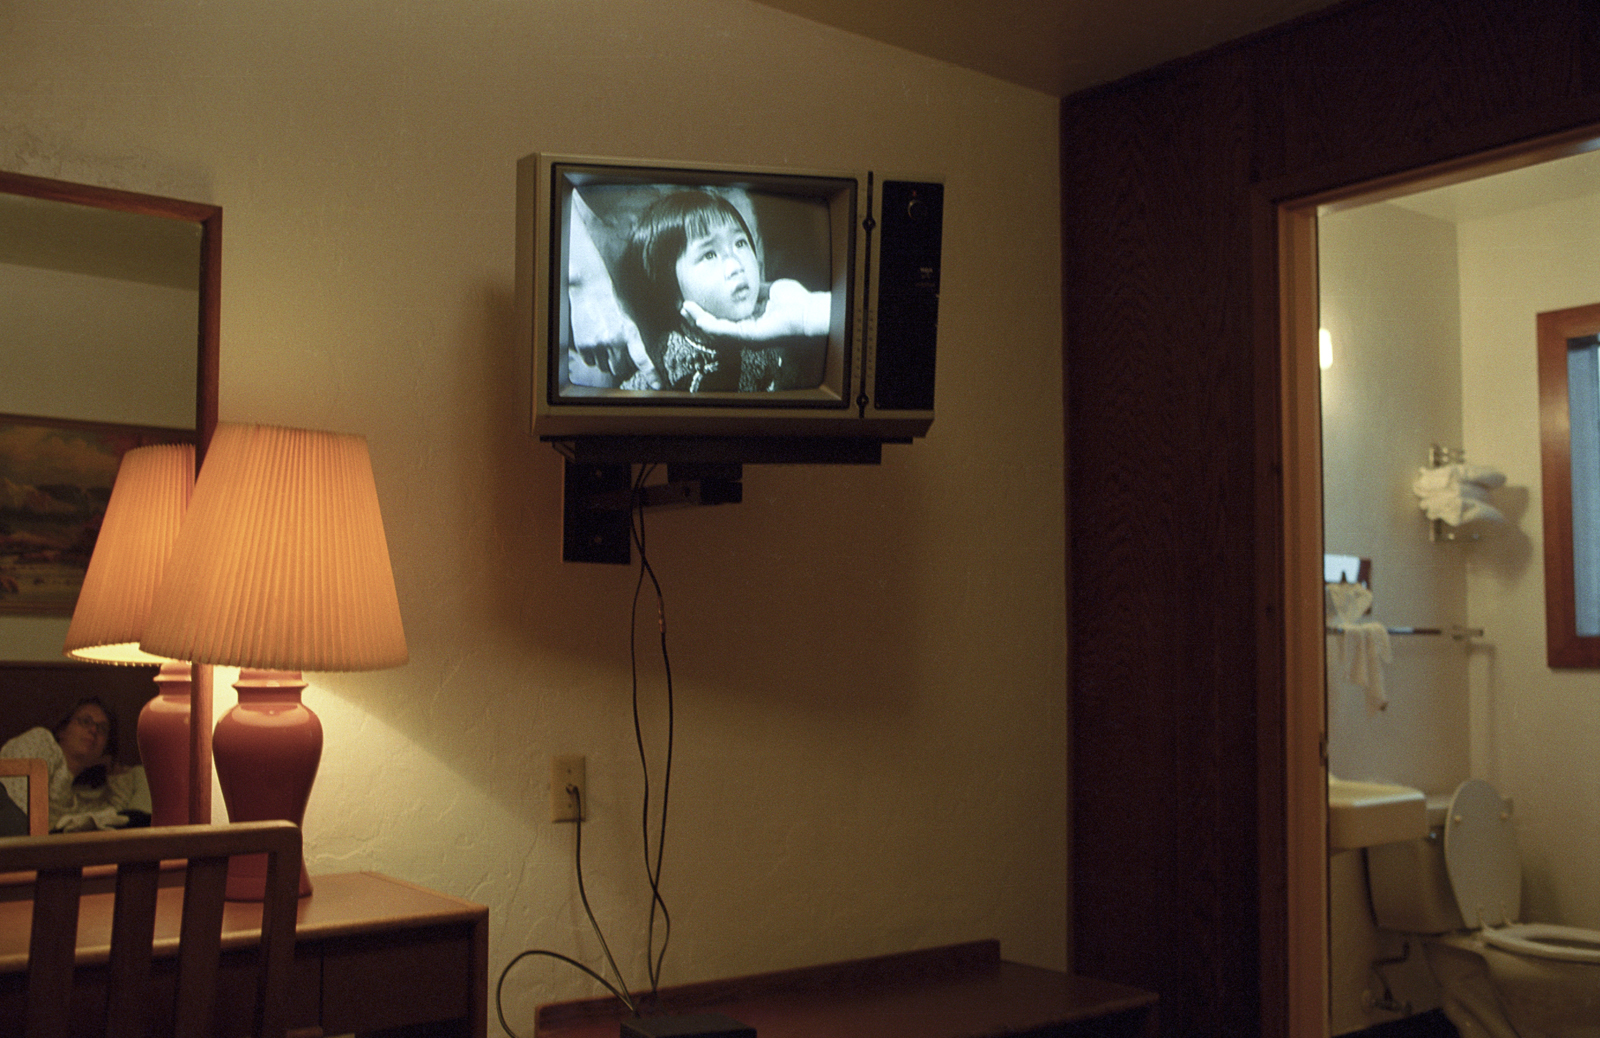 Color photograph of the interior of a room, possibly a hotel room, with a mounted black-and-white televison showing the face of a young East Asian girl. To the left is a table, chair, lamp, and mirror showing the reflection of someone lying on a bed. To the right is an open door leading to a bathroom.